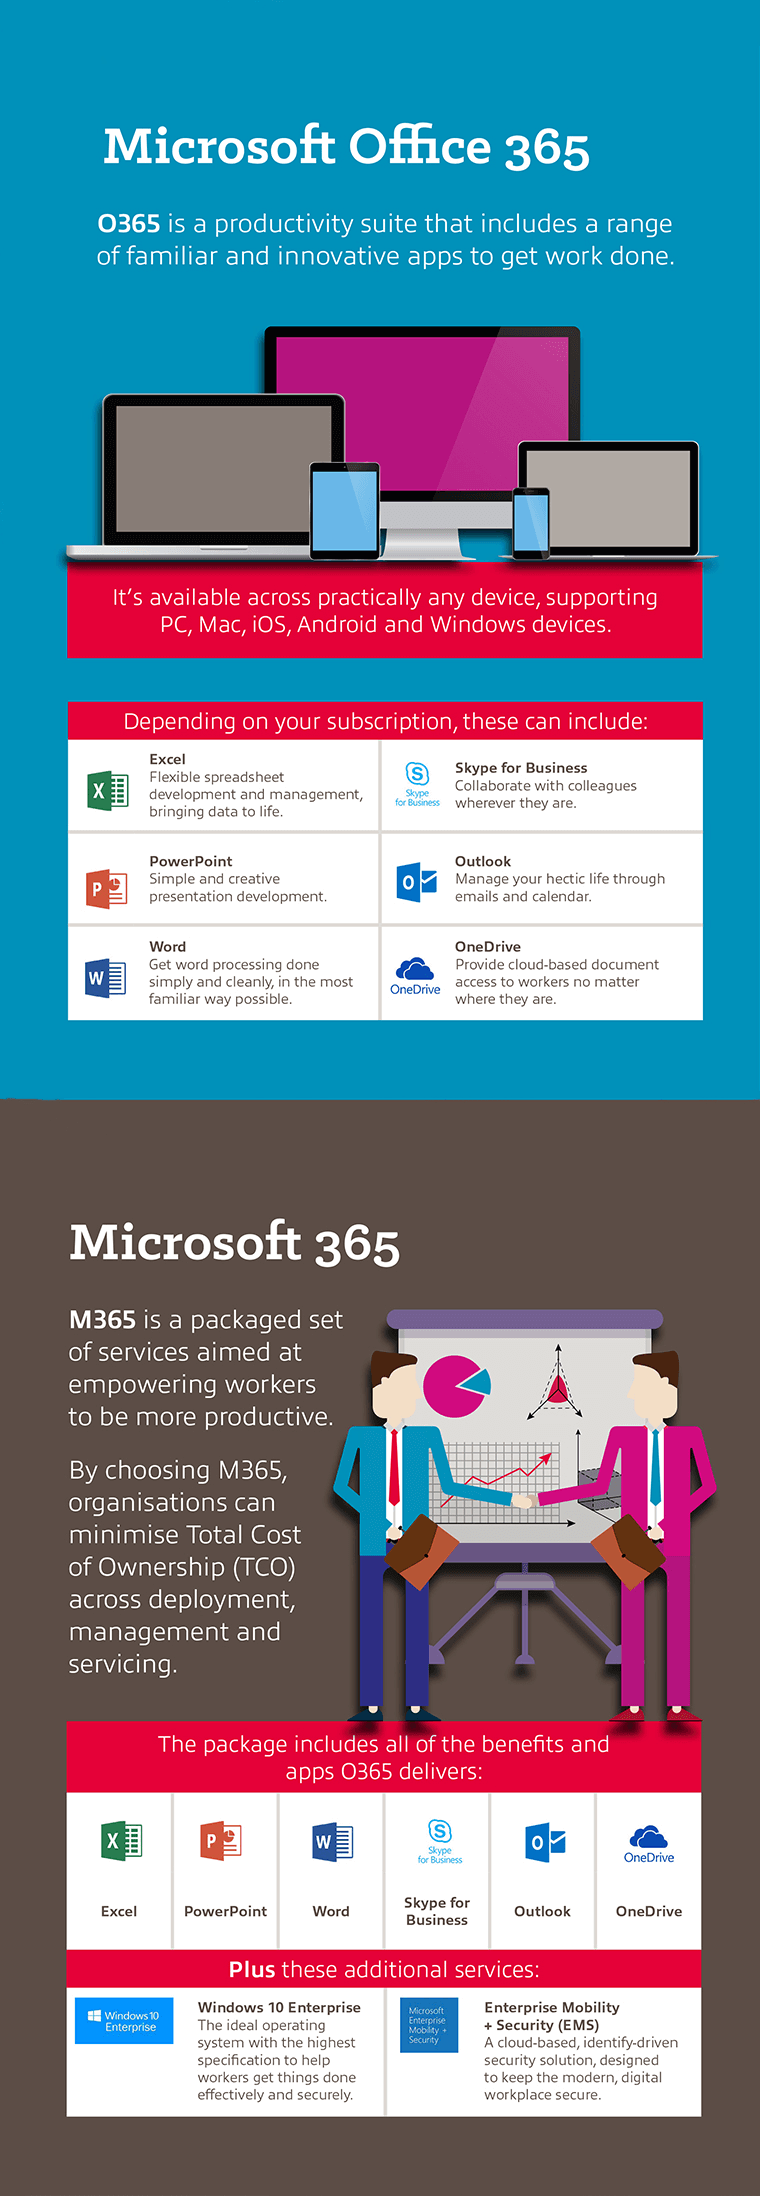 The Difference between O365 and M365